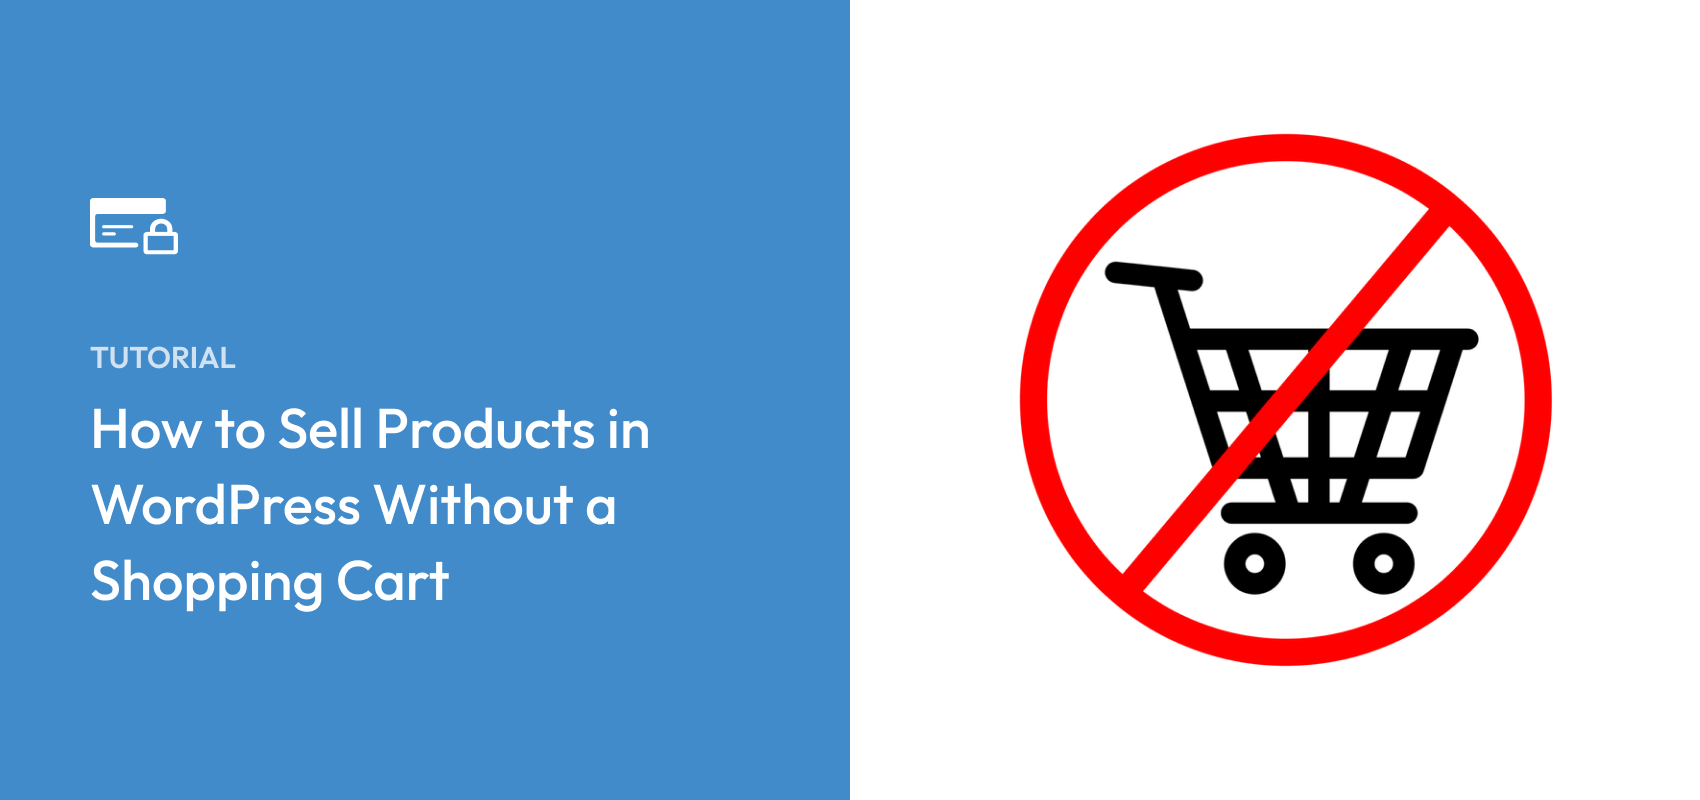 How to Sell Products in WordPress Without a Shopping Cart